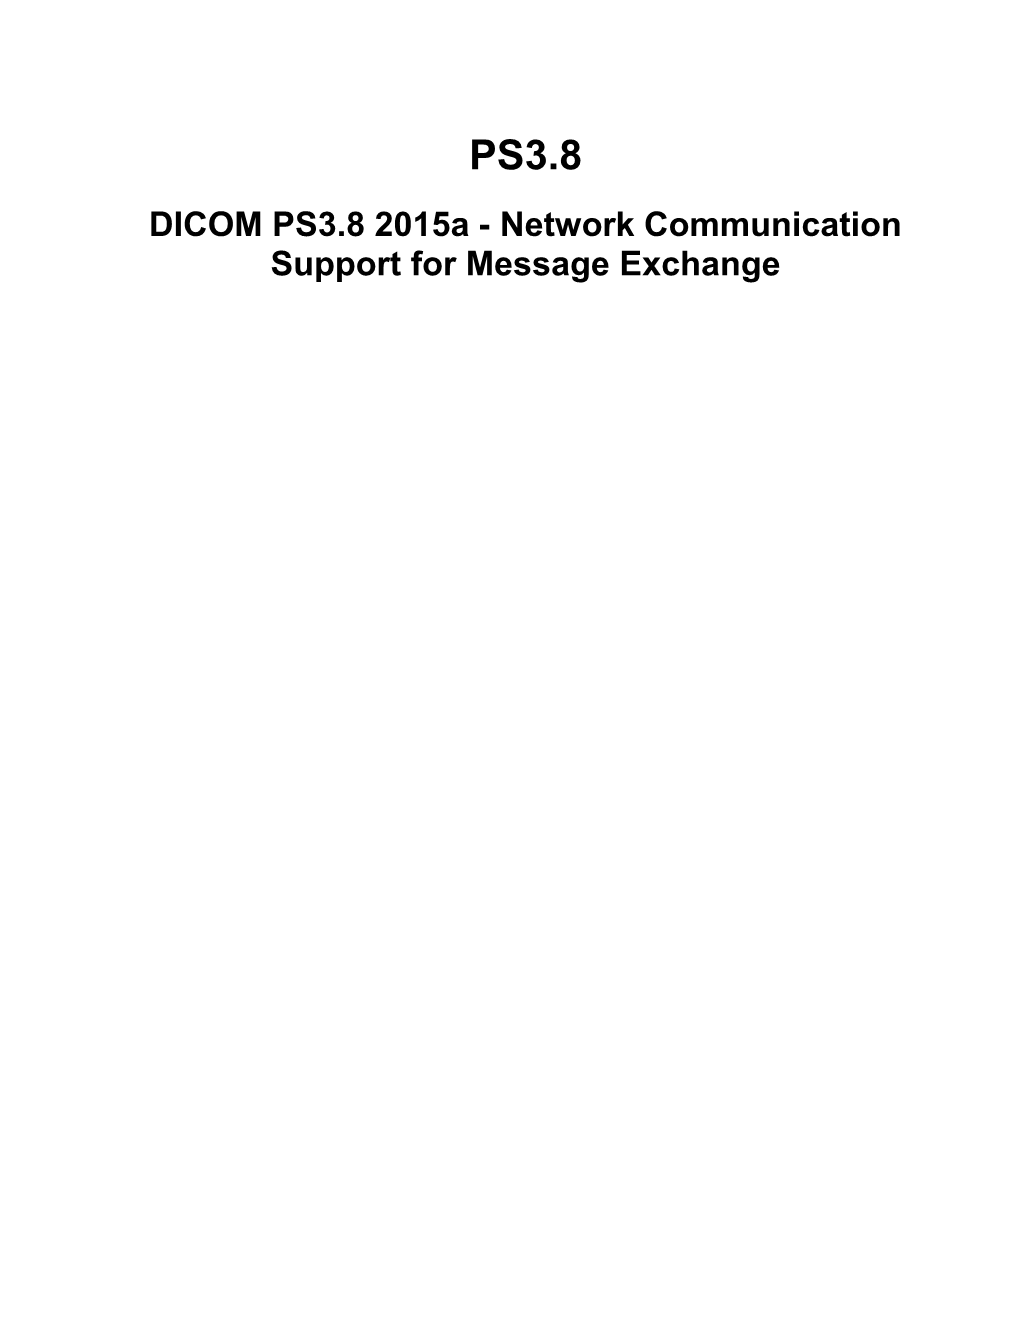 DICOM PS3.8 2015A - Network Communication Support for Message Exchange